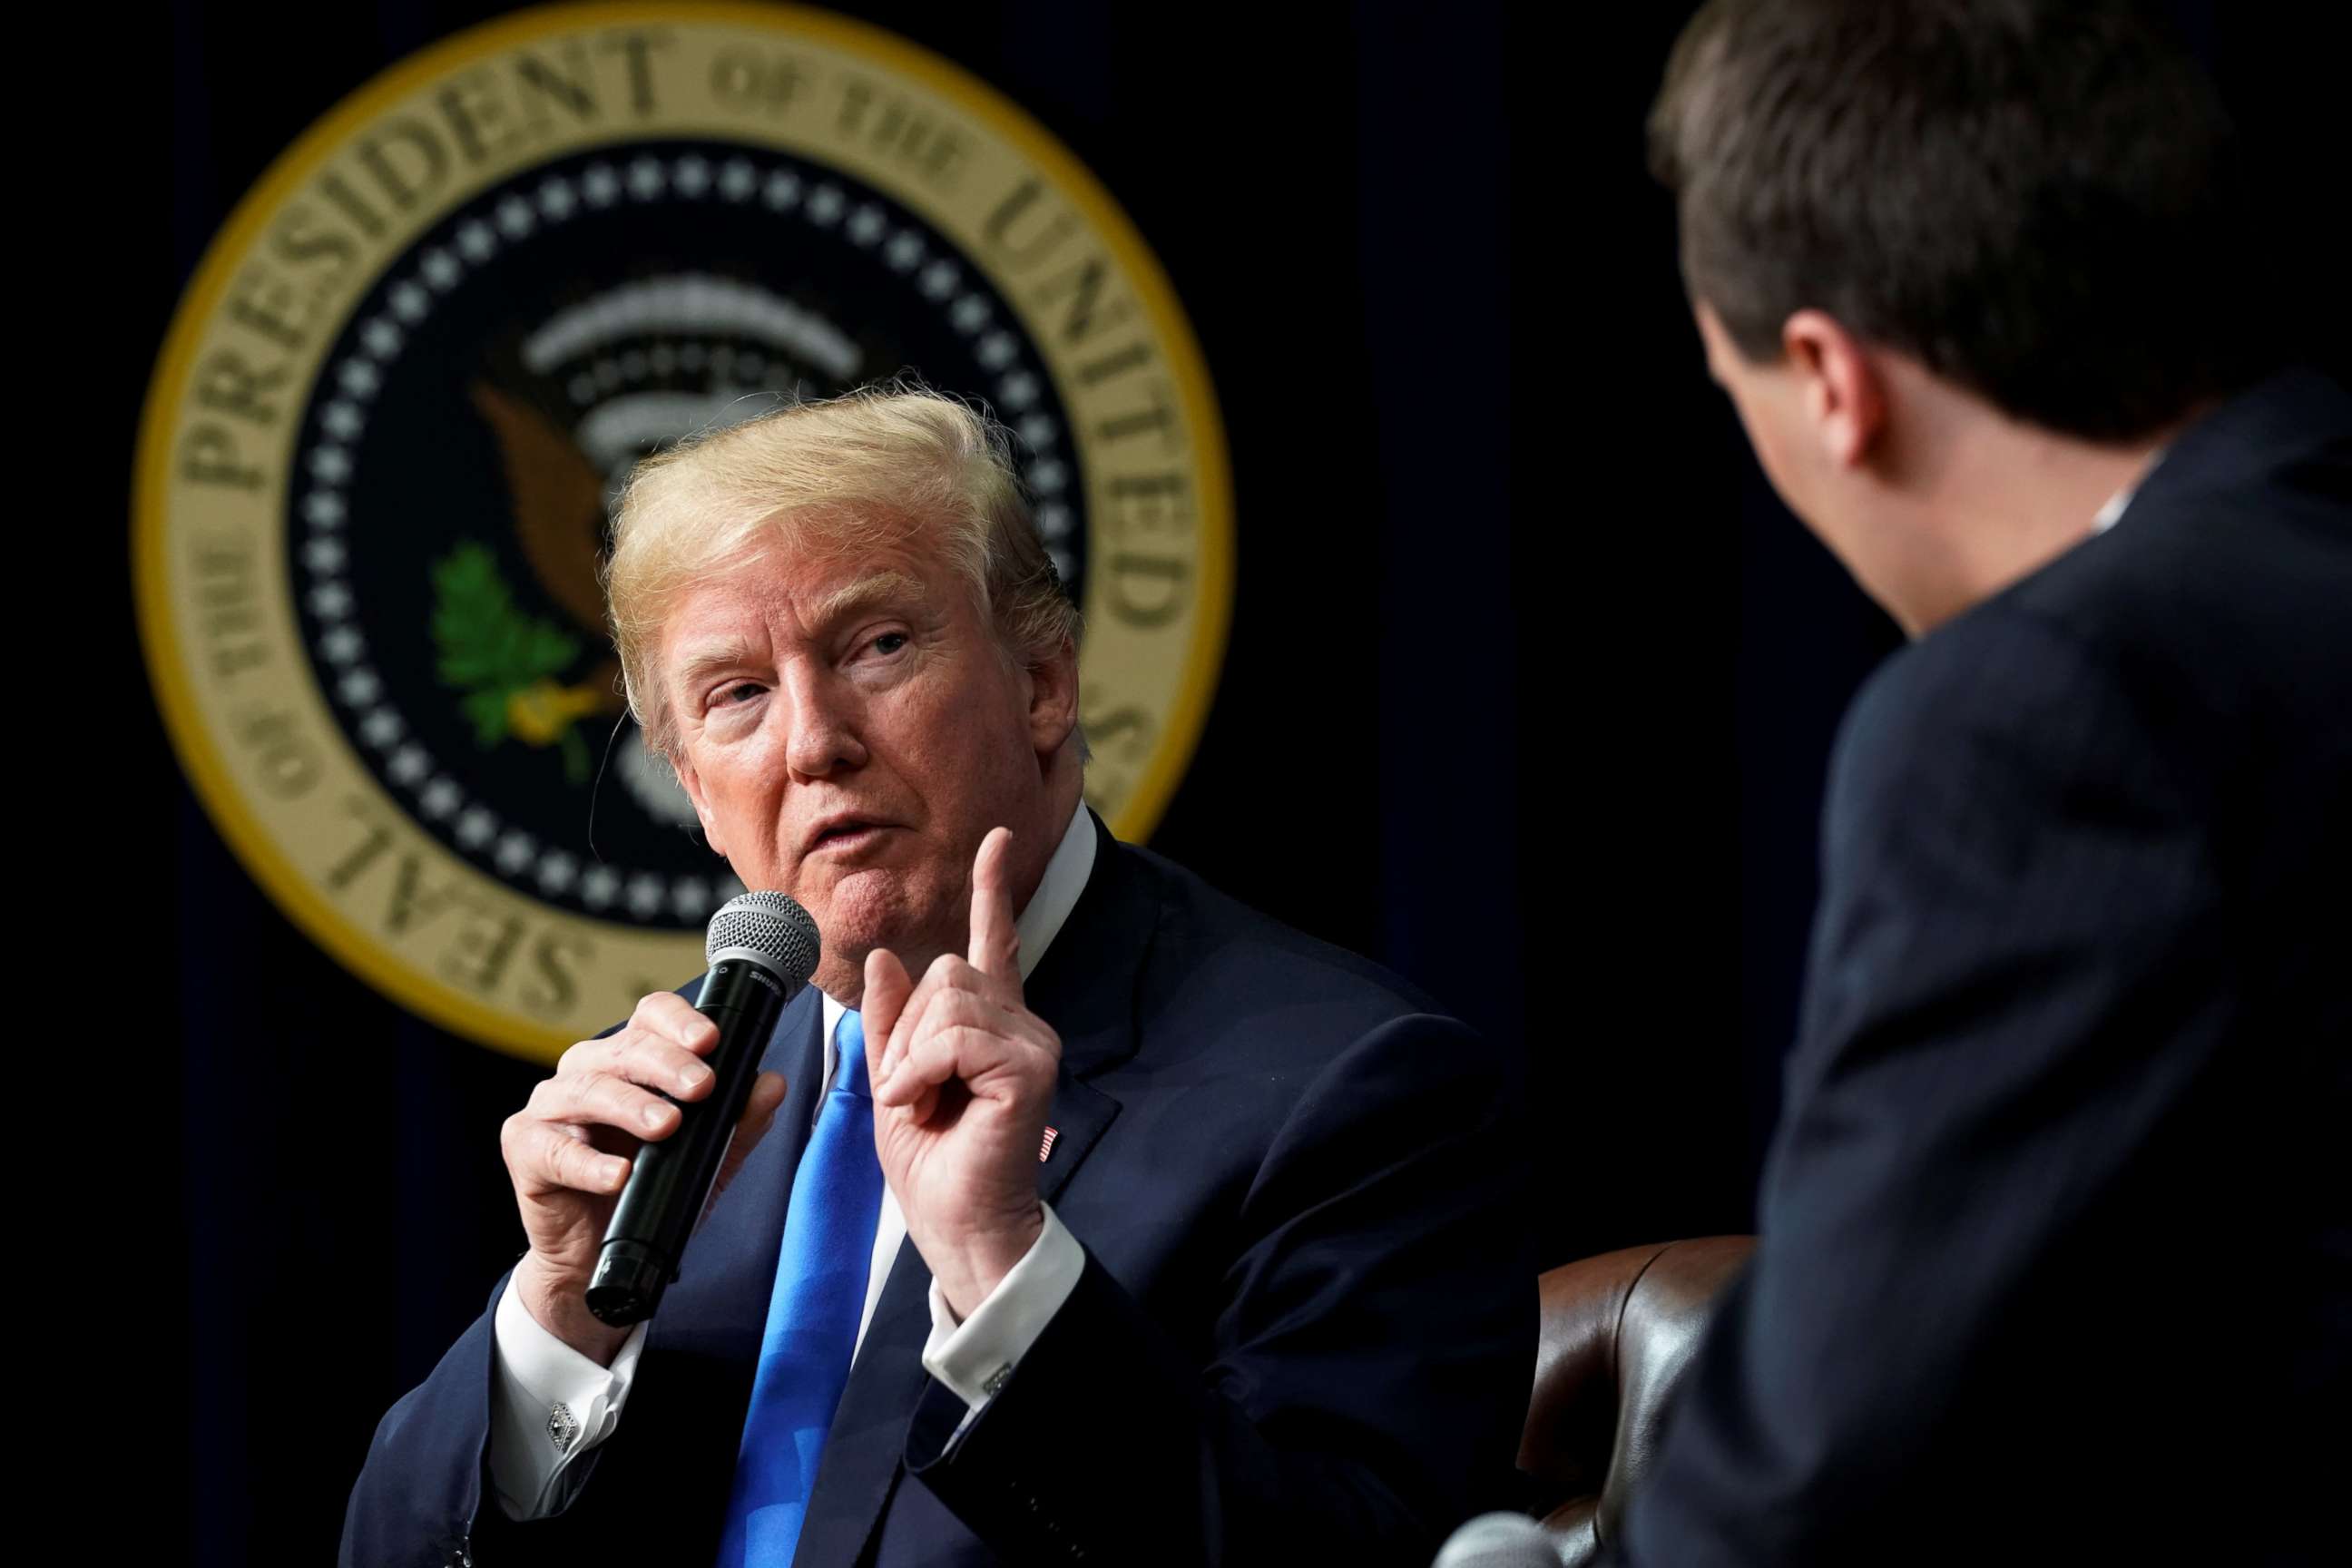 PHOTO: President Donald Trump participates in an onstage interview with moderator Charlie Kirk, founder of Turning Point USA, during a youth forum titled Generation Next, at the White House in Washington, March 22, 2018.